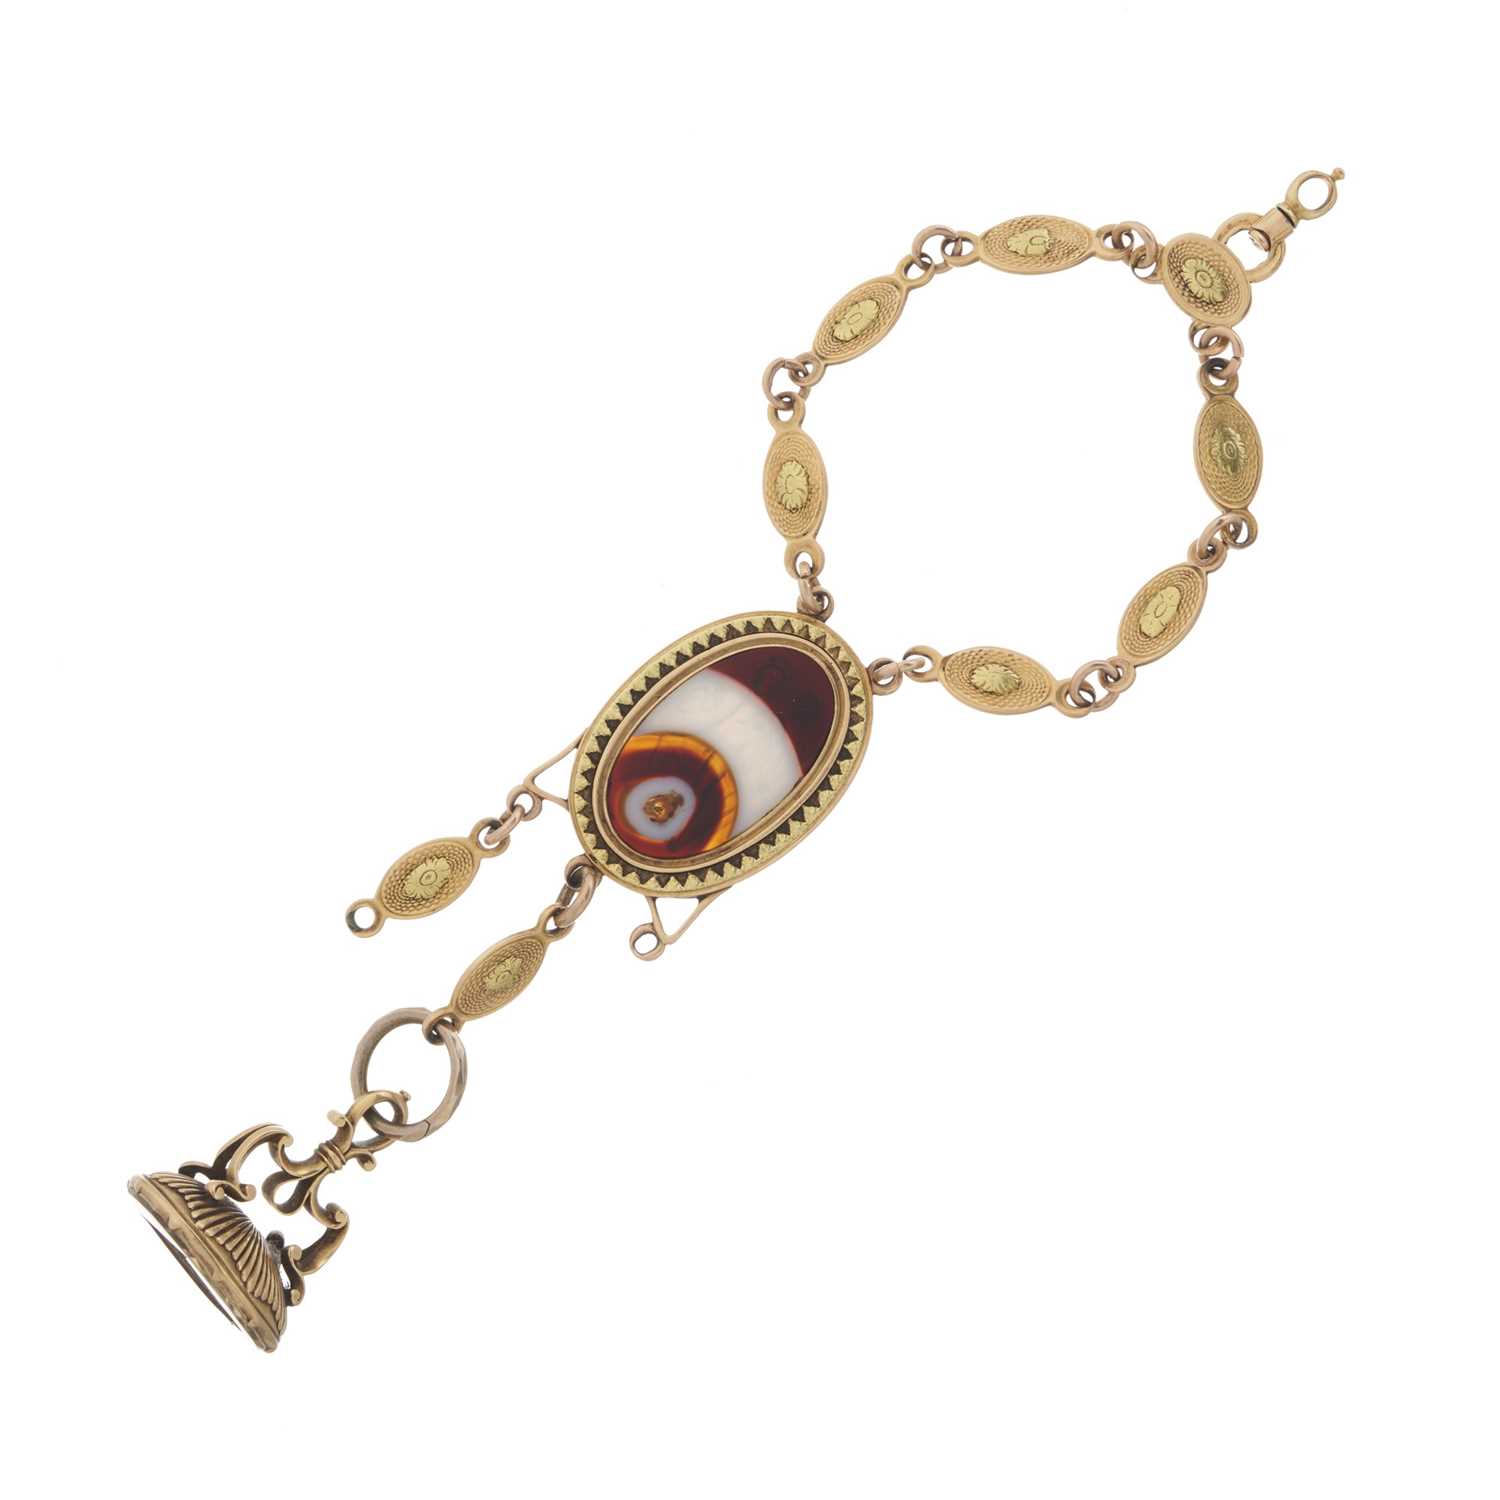 A mid to late 19th century gold agate and citrine intaglio chatelaine